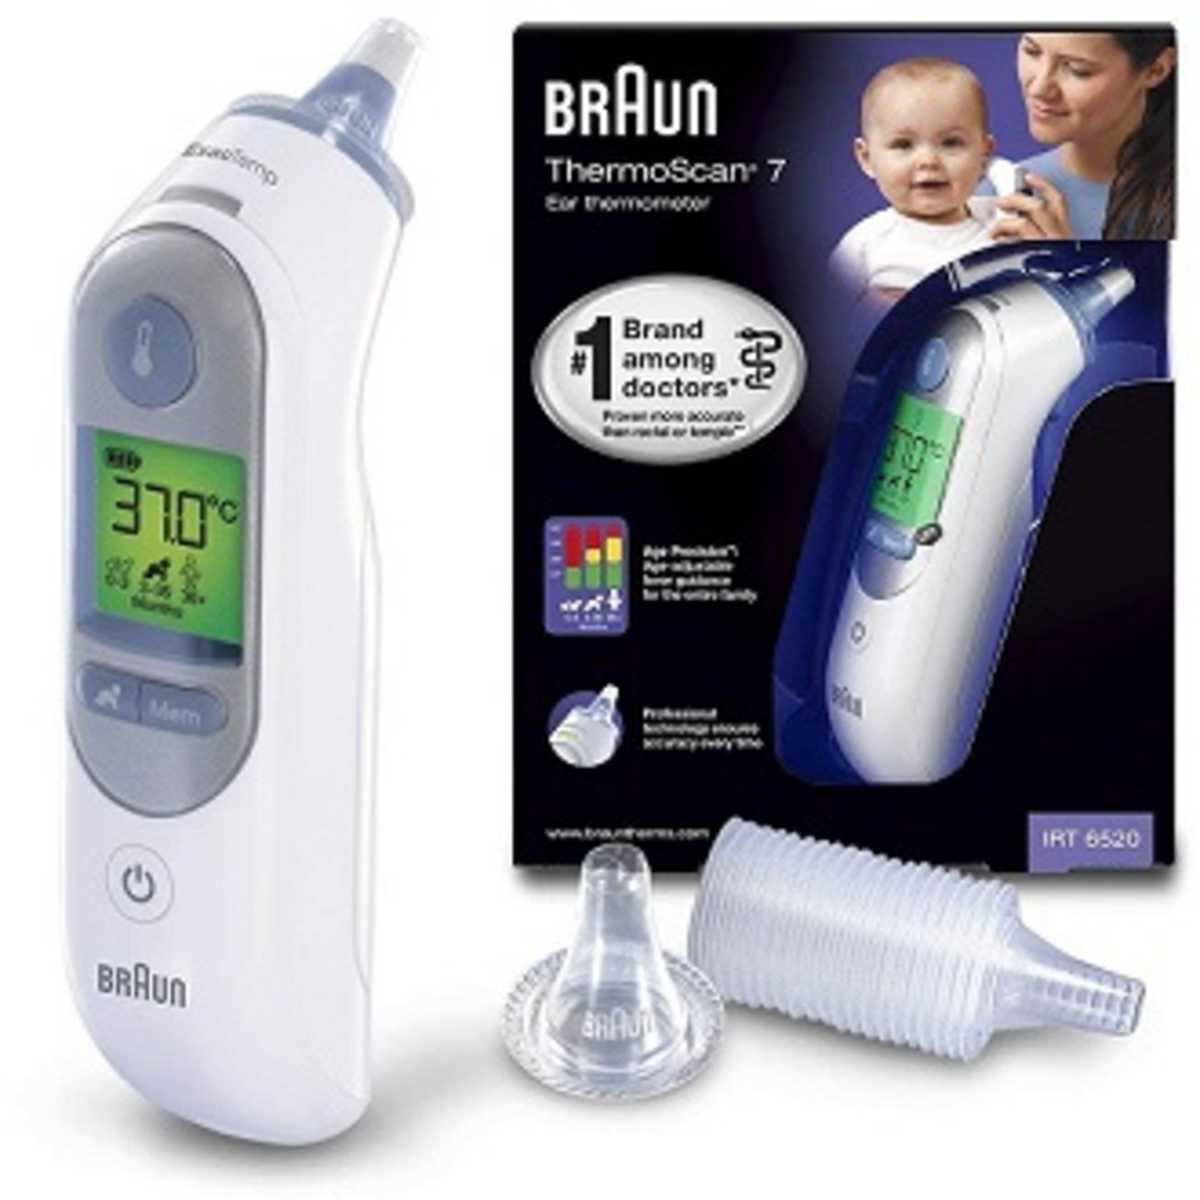 Braun Thermoscan 7 - Irt 6520 Ear Thermometer